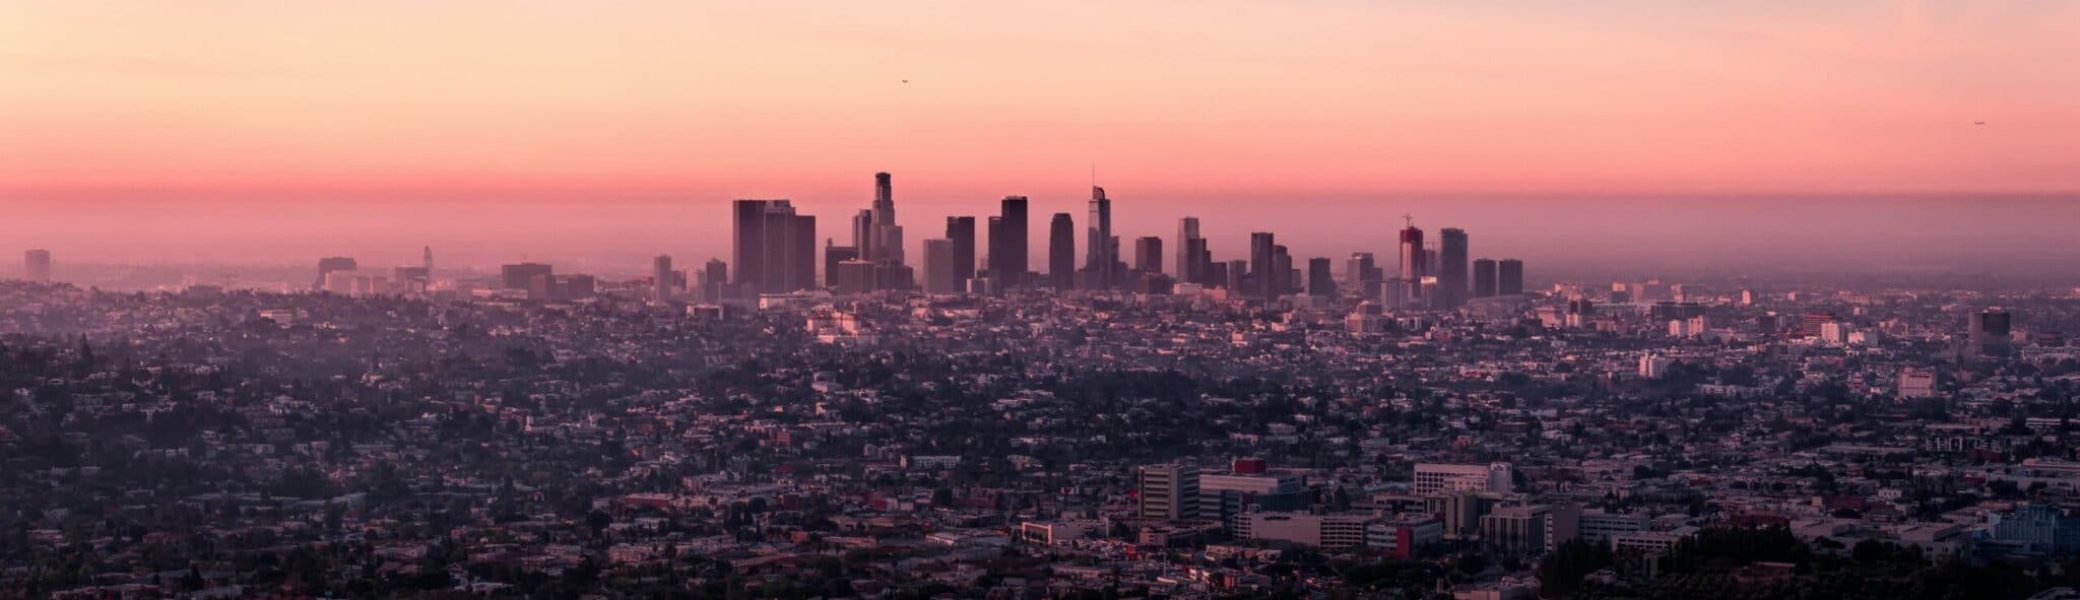 City of Los Angeles during the evening